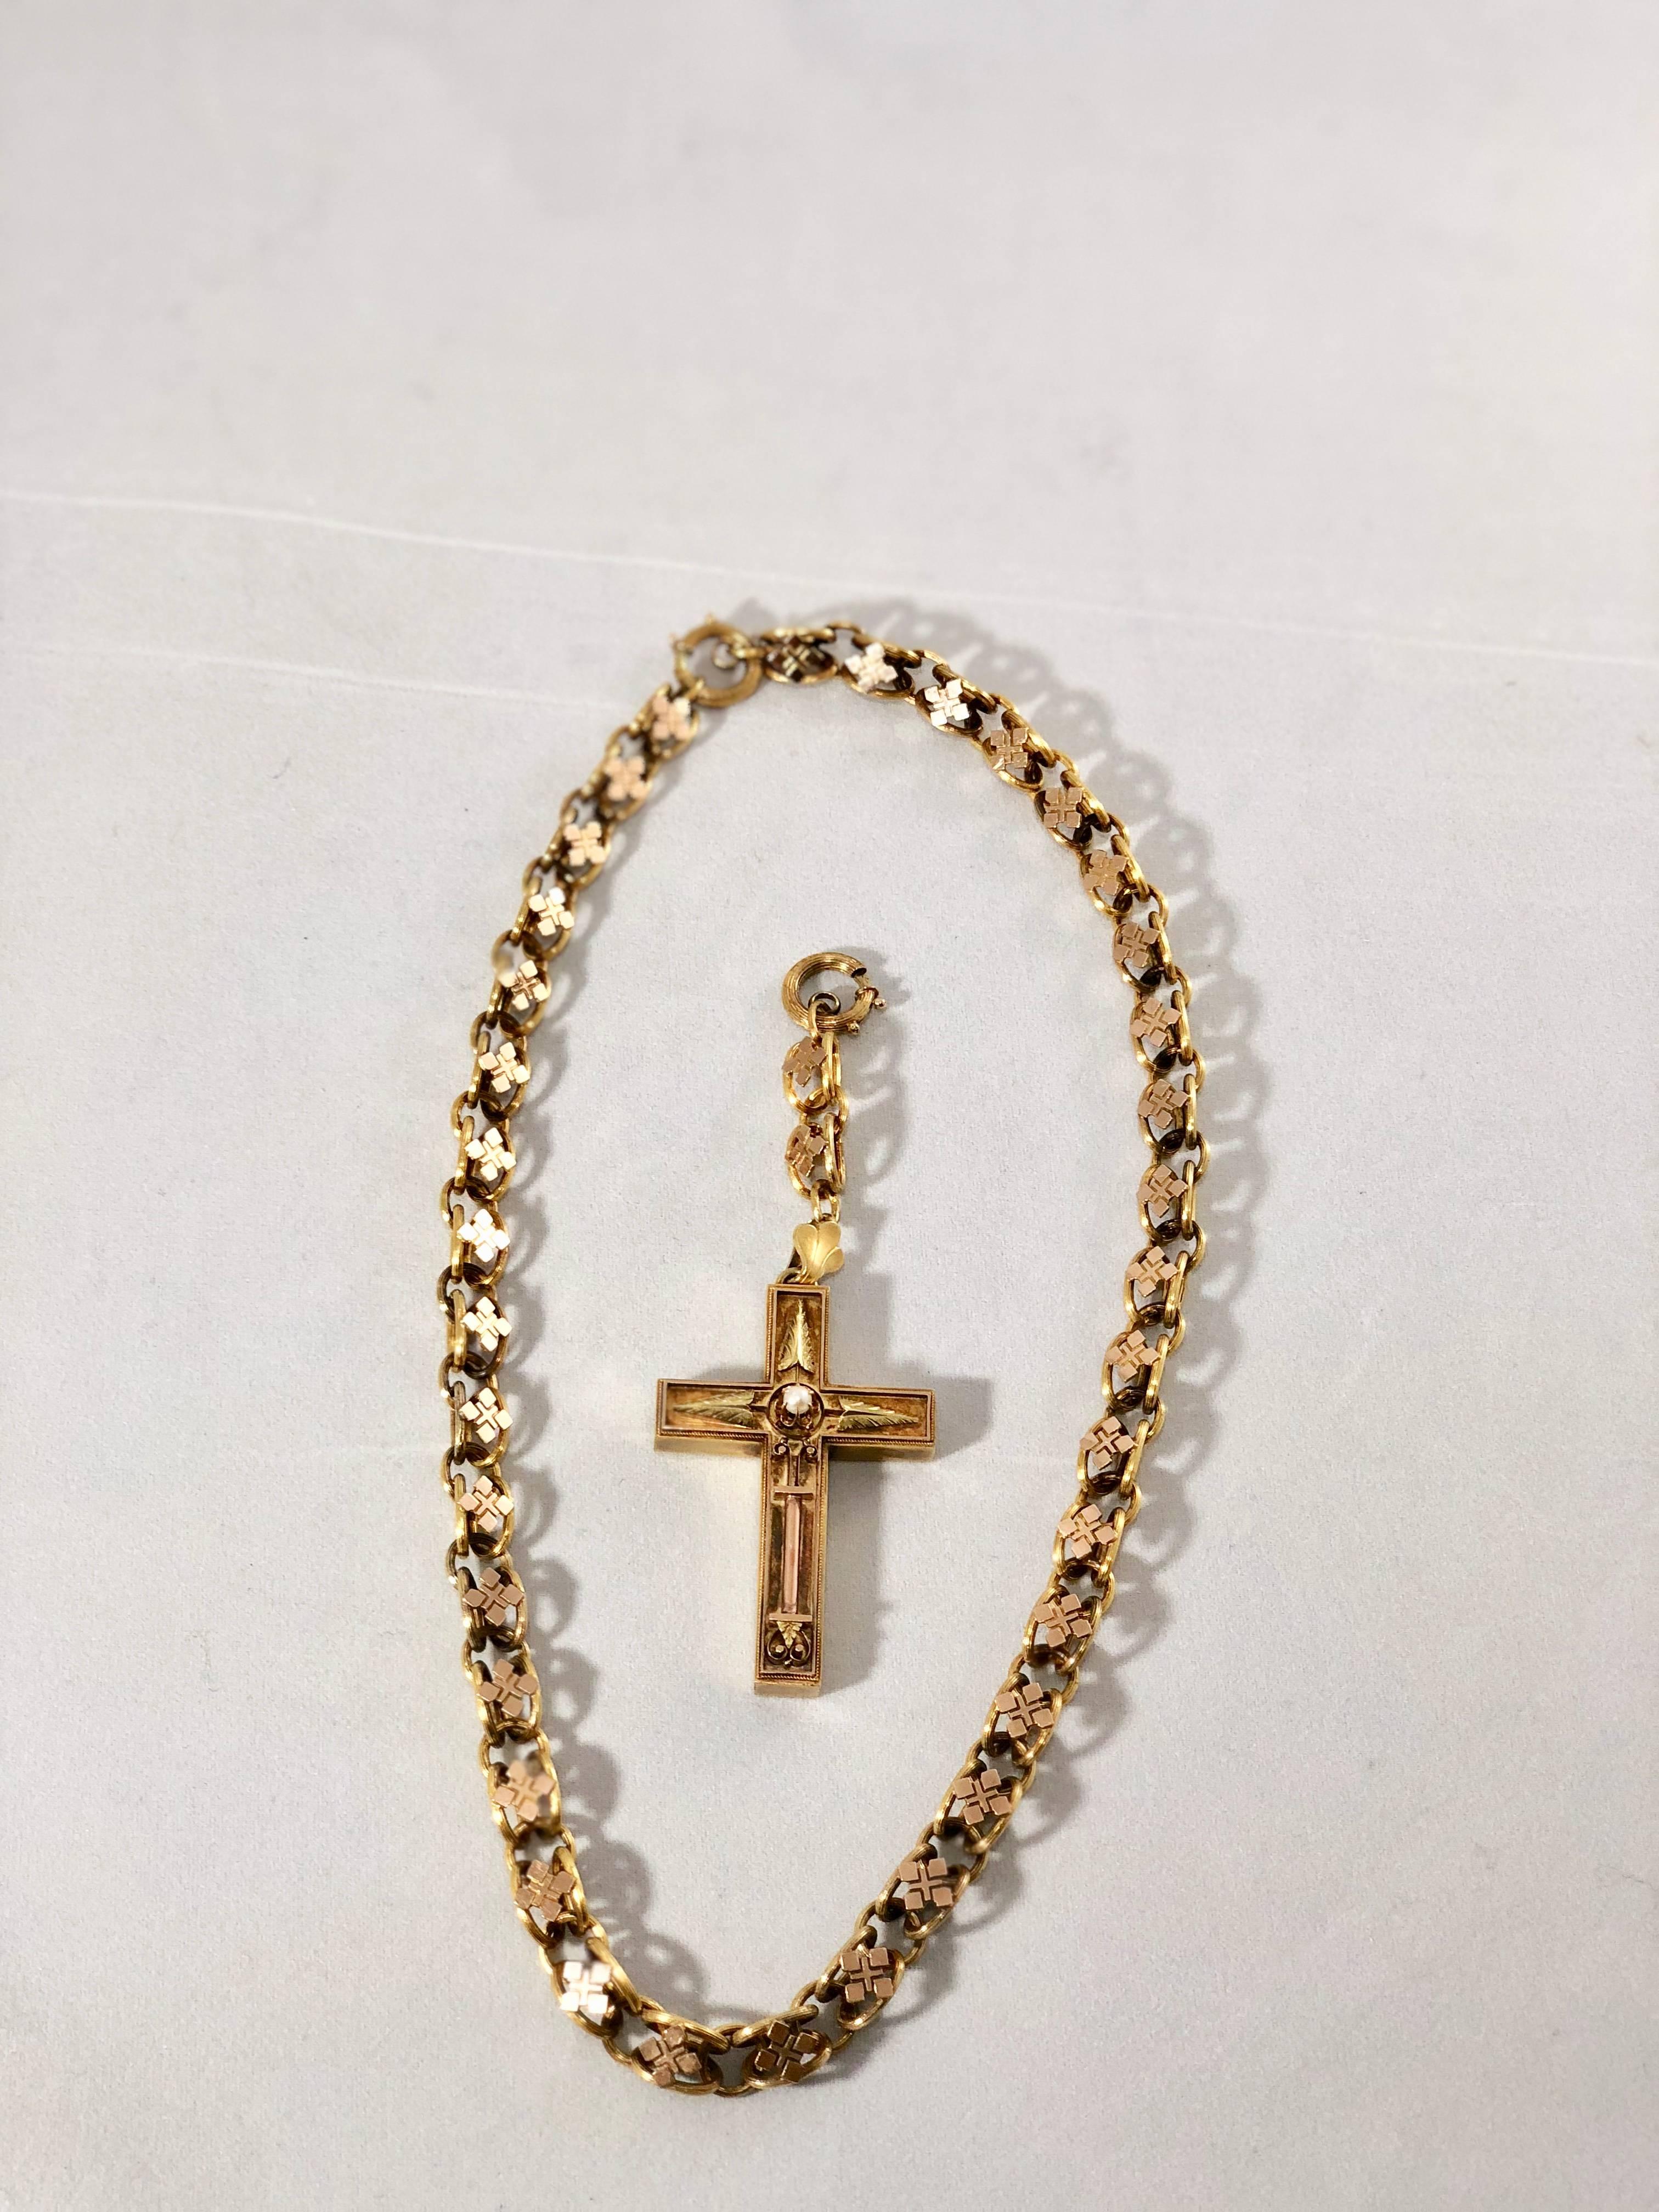 Antique Victorian 15 Karat Book Chain and Cross with Seed Pearl Pendant Necklace For Sale 5